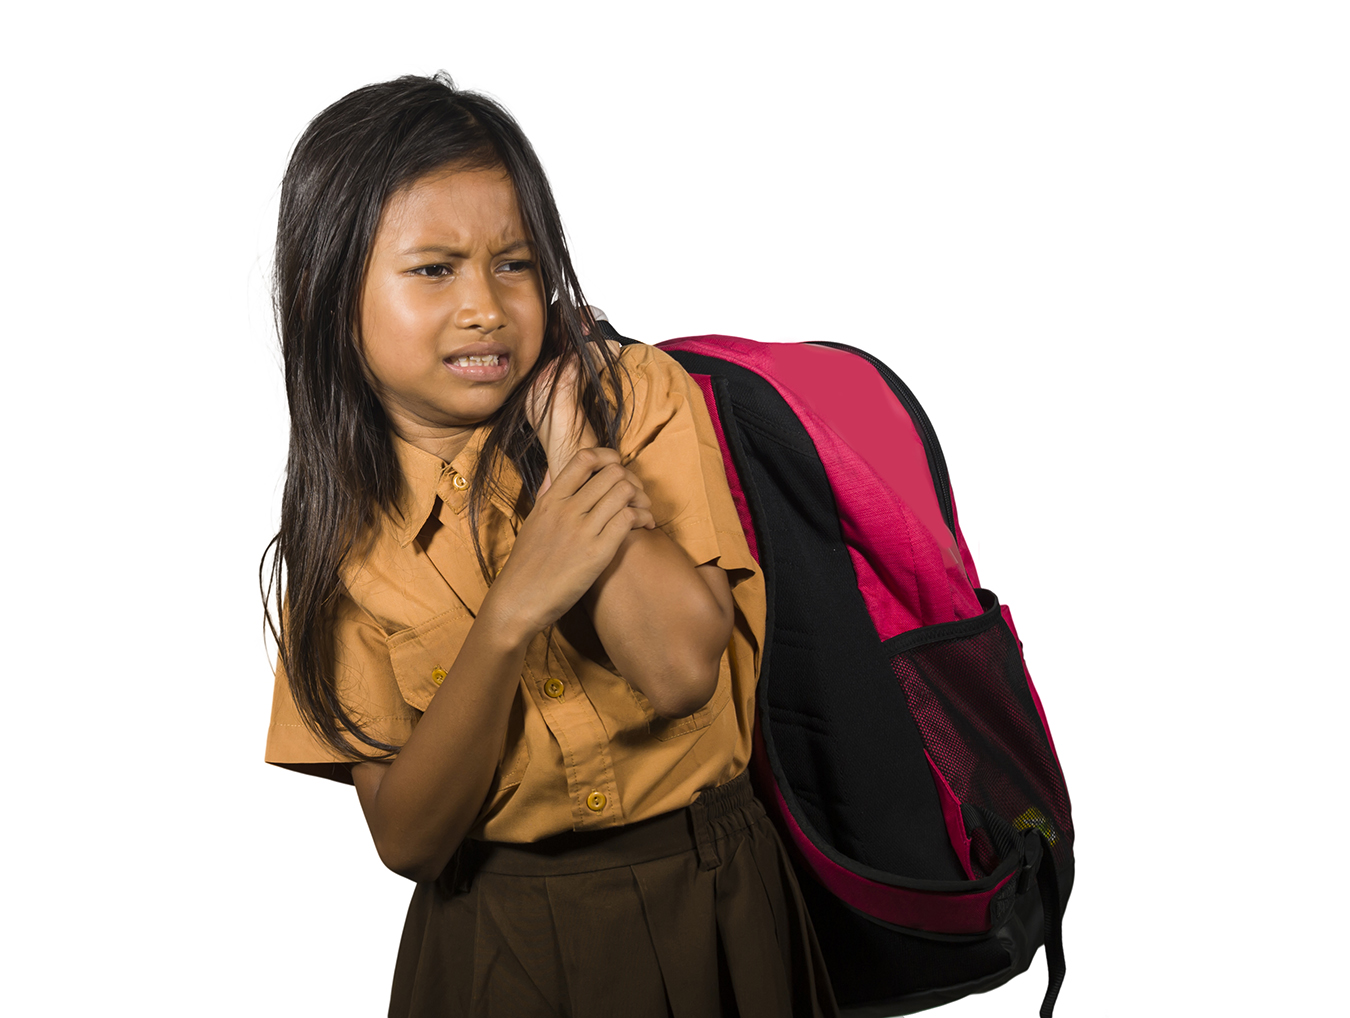 Young girl carrying a backpack that is too heavy and causing back pain.